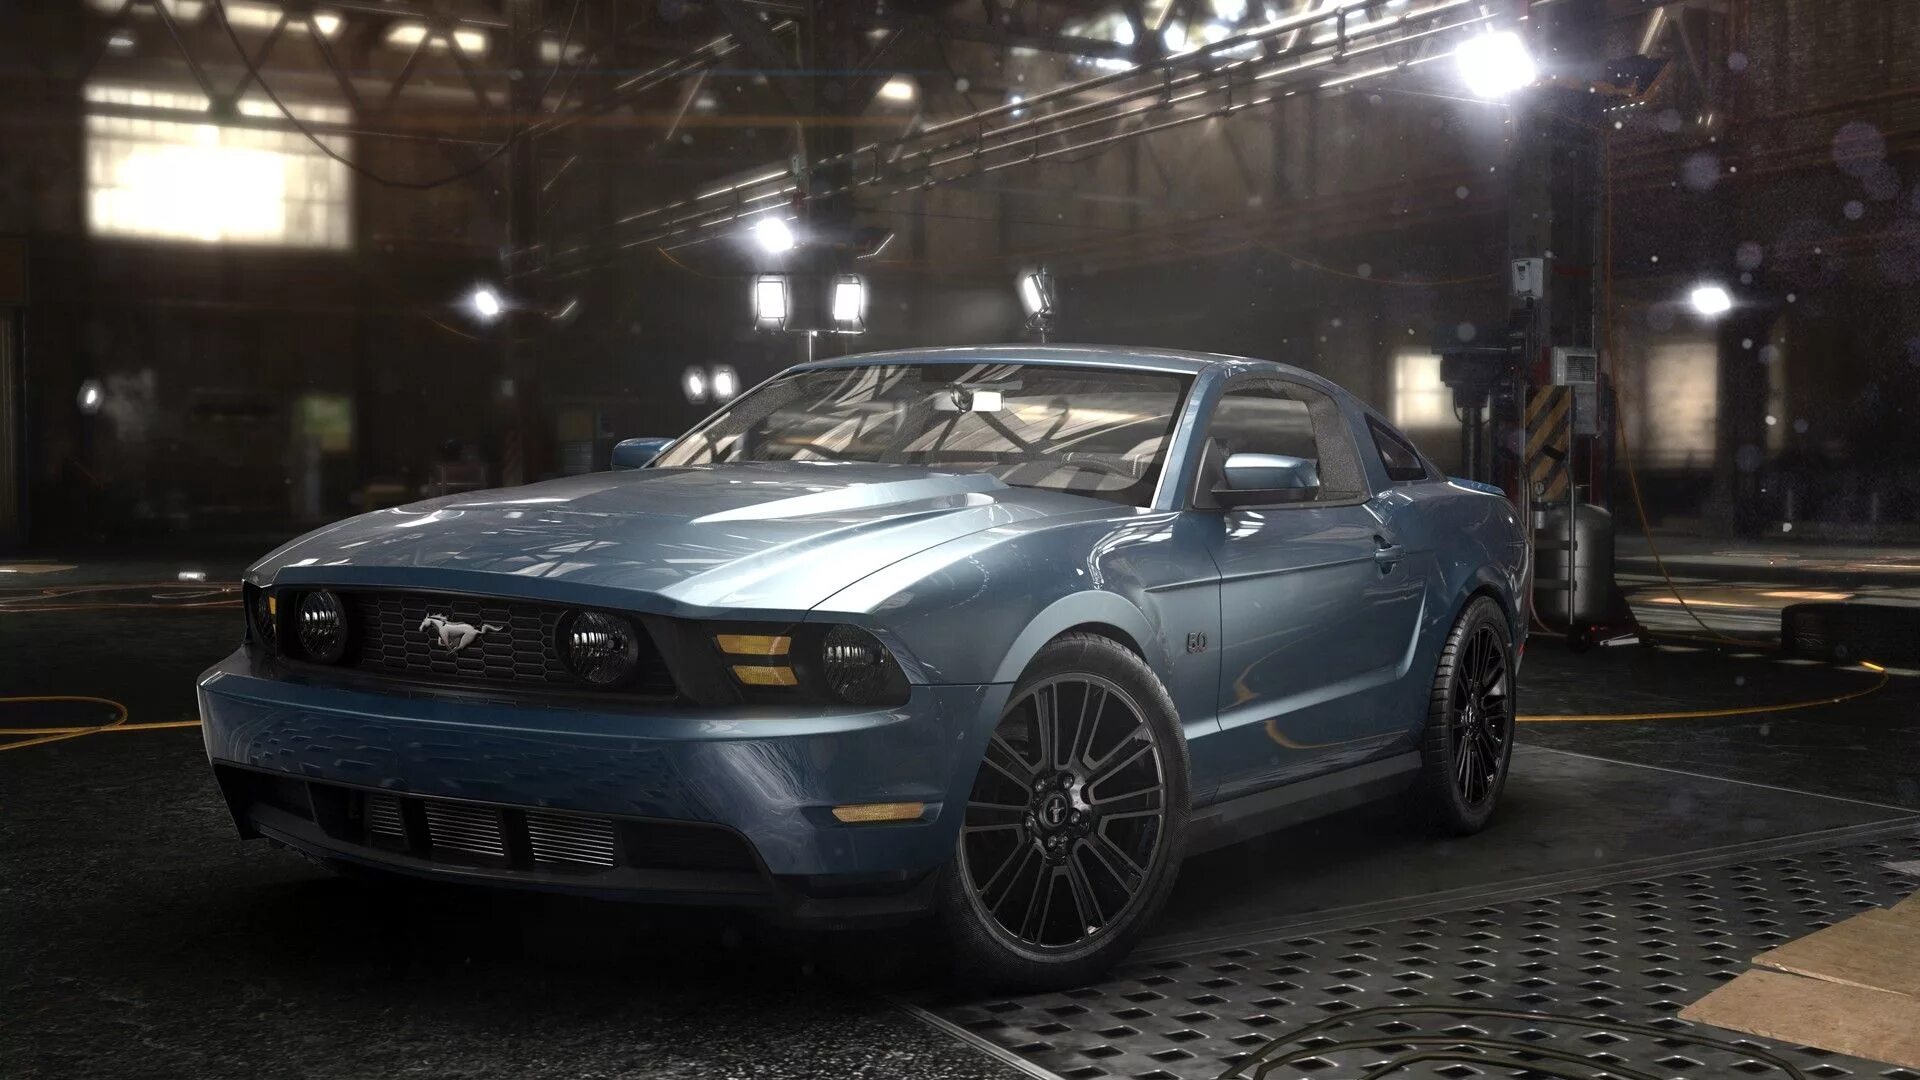 Crew донат. Ford Mustang gt 2011 the Crew. Ford Mustang gt 2024. Форд Мустанг the Crew 2. Ford Mustang gt 2011.